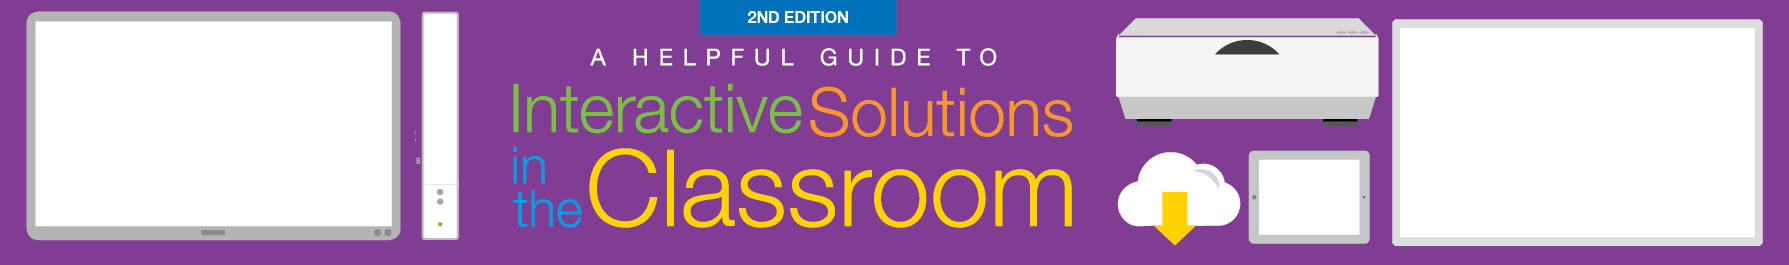 A Helpful Guide to Interactive Solutions in the Classroom